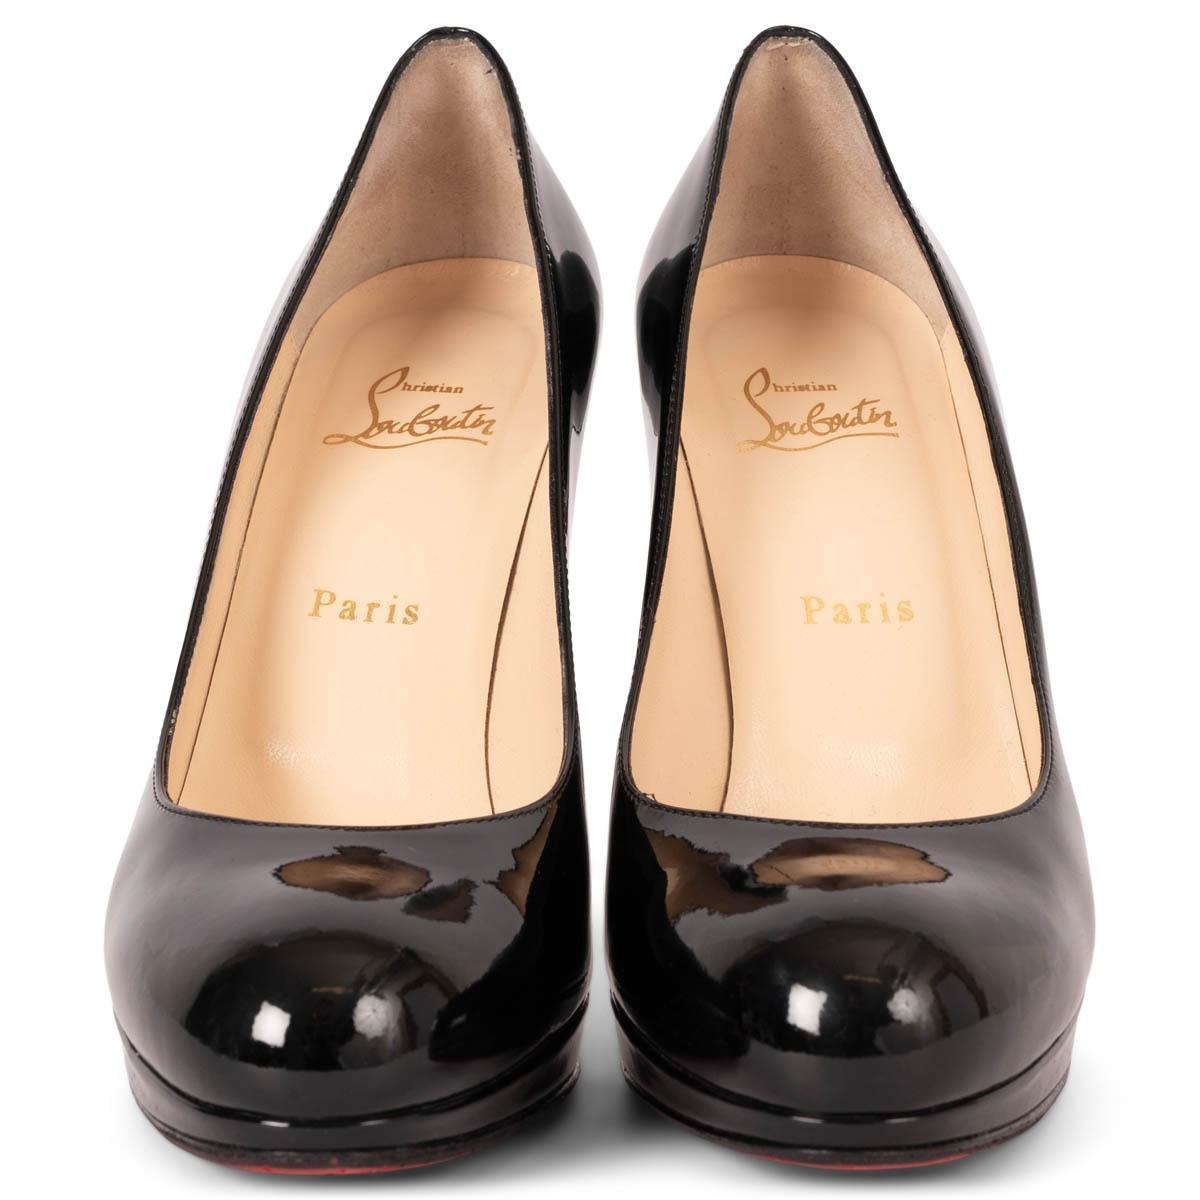 100% authentic Christian Louboutin New Simple 120 Pumps in patent calf leather and a round toe. Have been worn once or twice and are in virtually new condition. Come with dust bag. 

Measurements
Imprinted Size	39
Shoe Size	39
Inside Sole	25.5cm